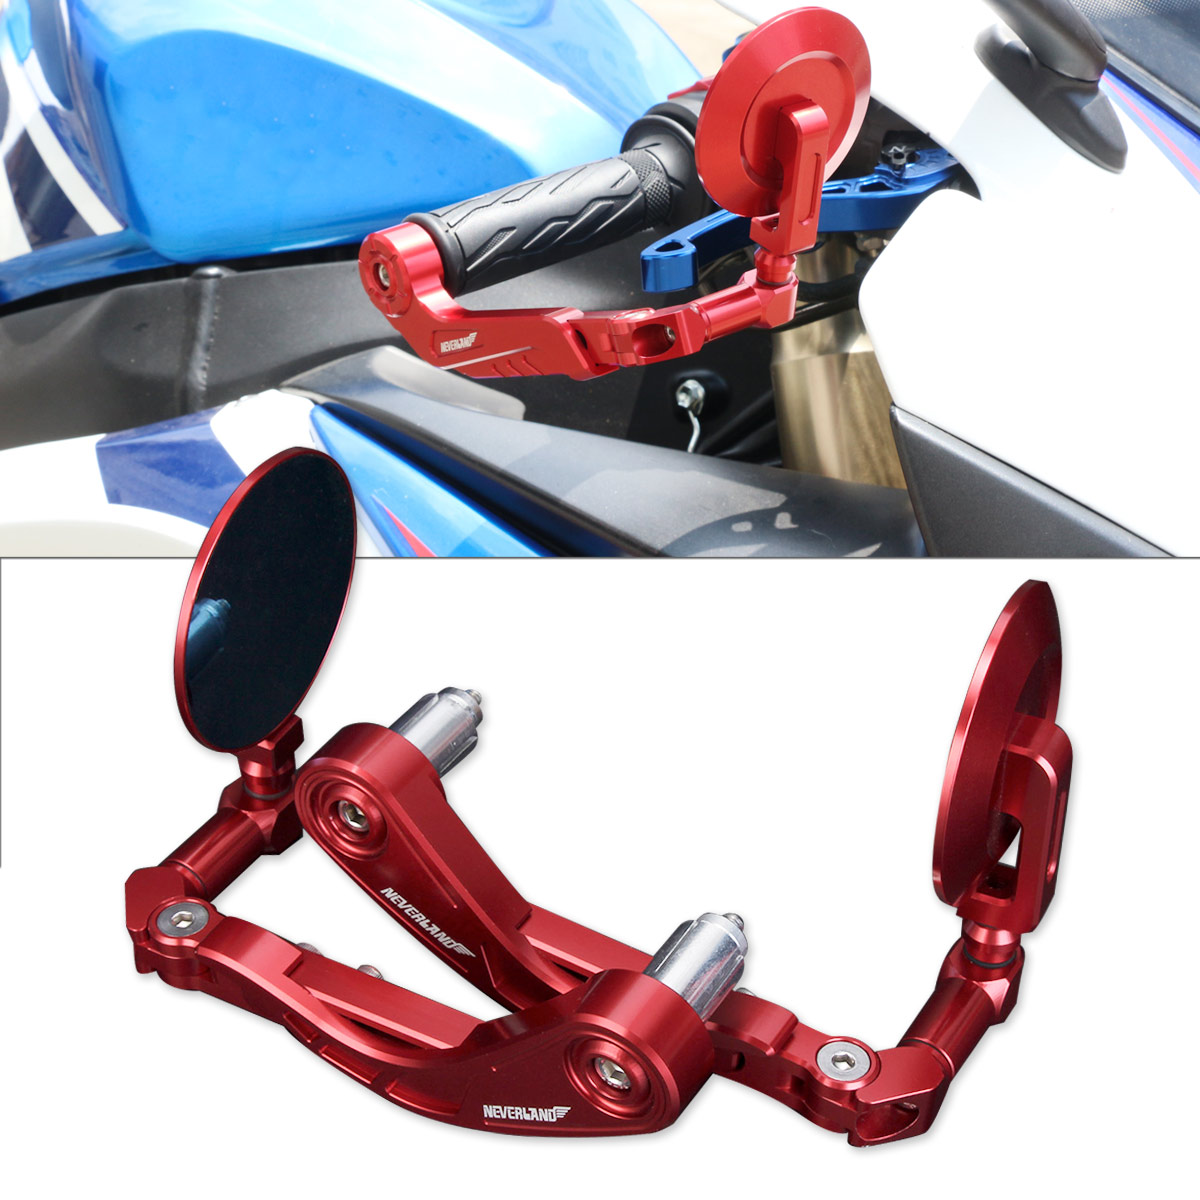 NEVERLAND 22Mm 7/8Inch Motorcycle Adjustable Aside Bar End Mirrors Brake Clutch Lever Guard Protector